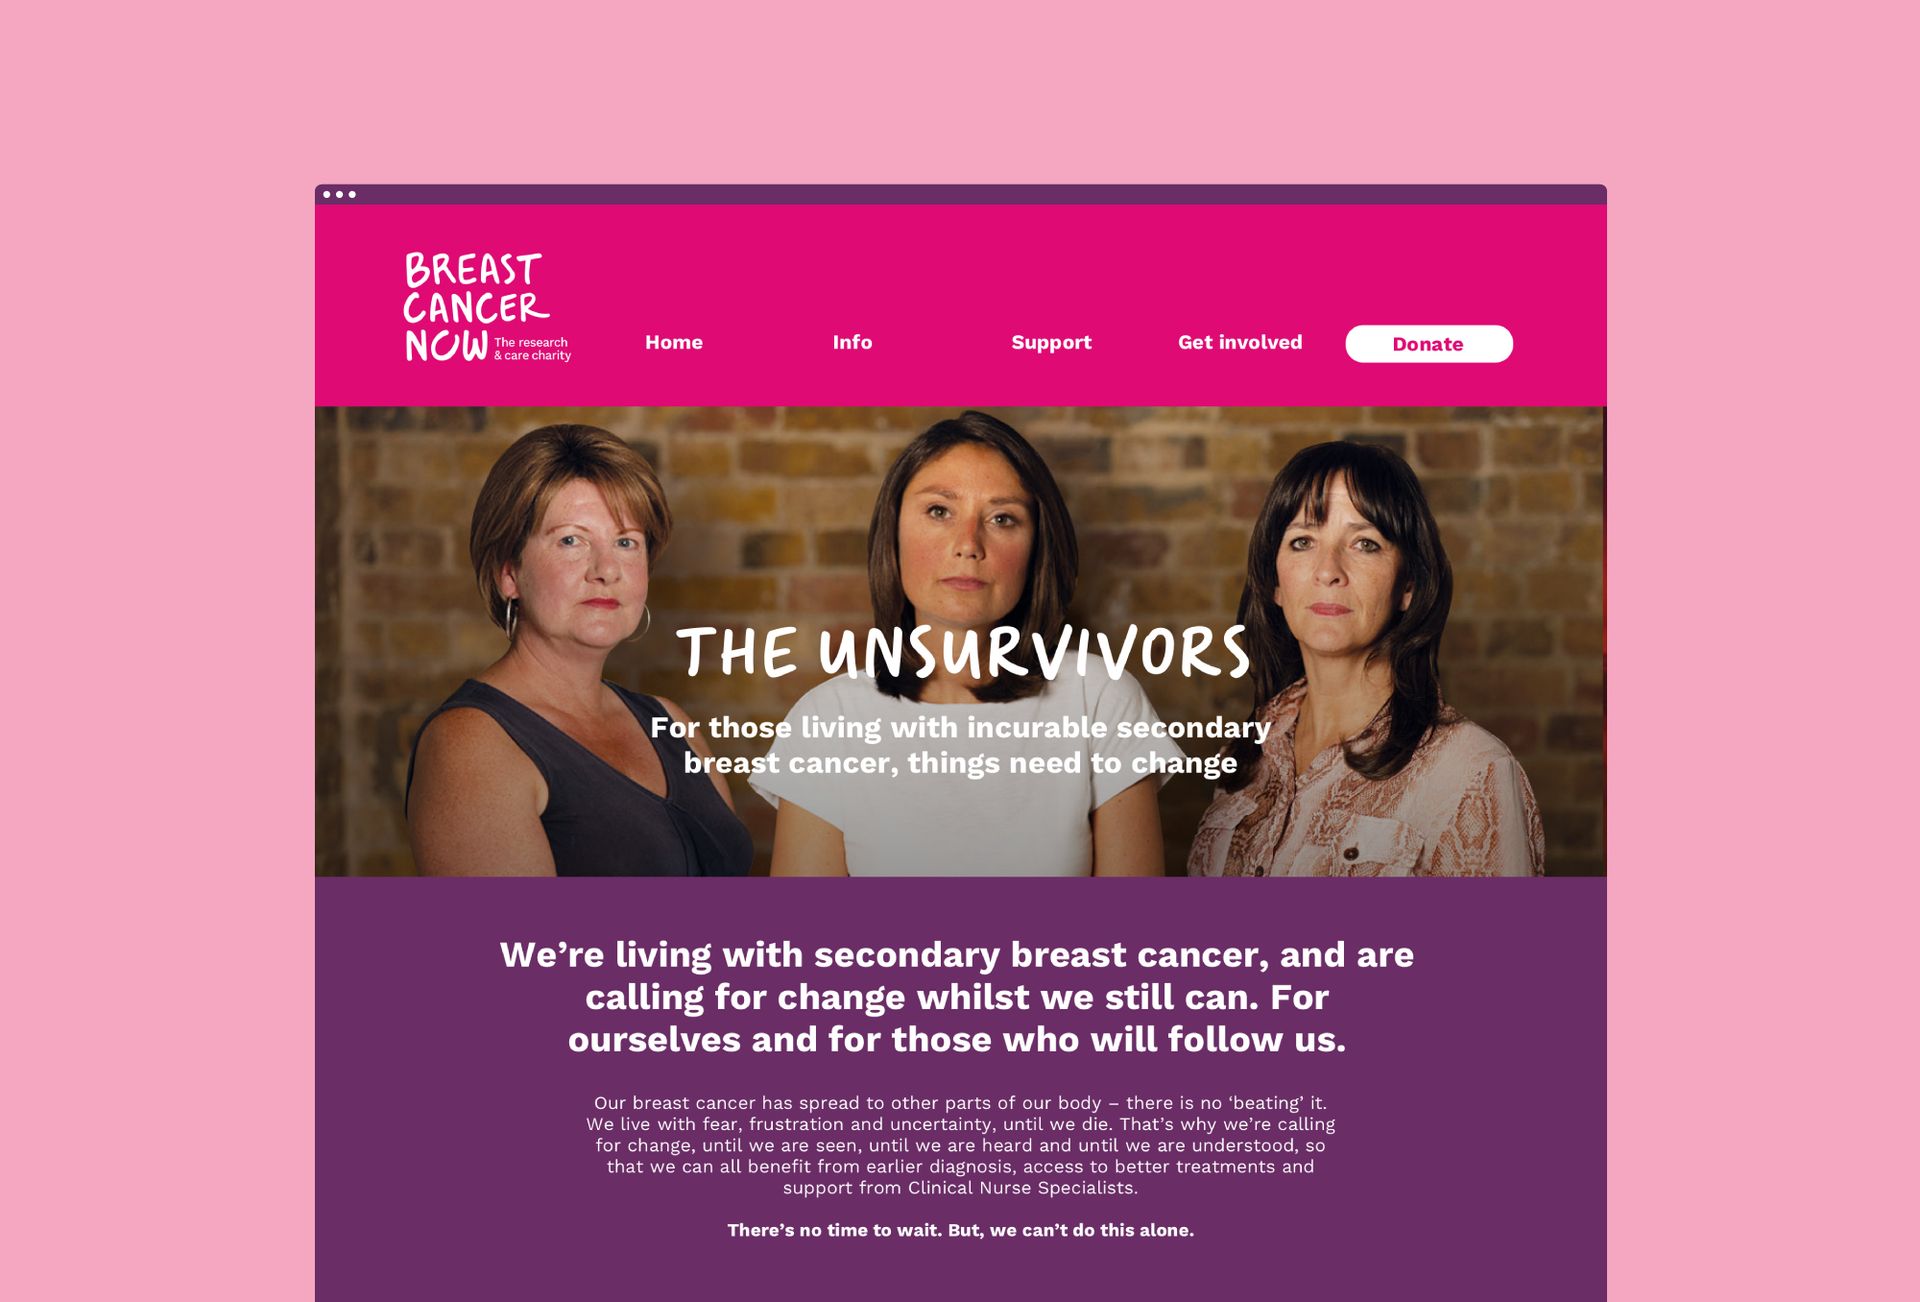 Breast Cancer Now campaign website